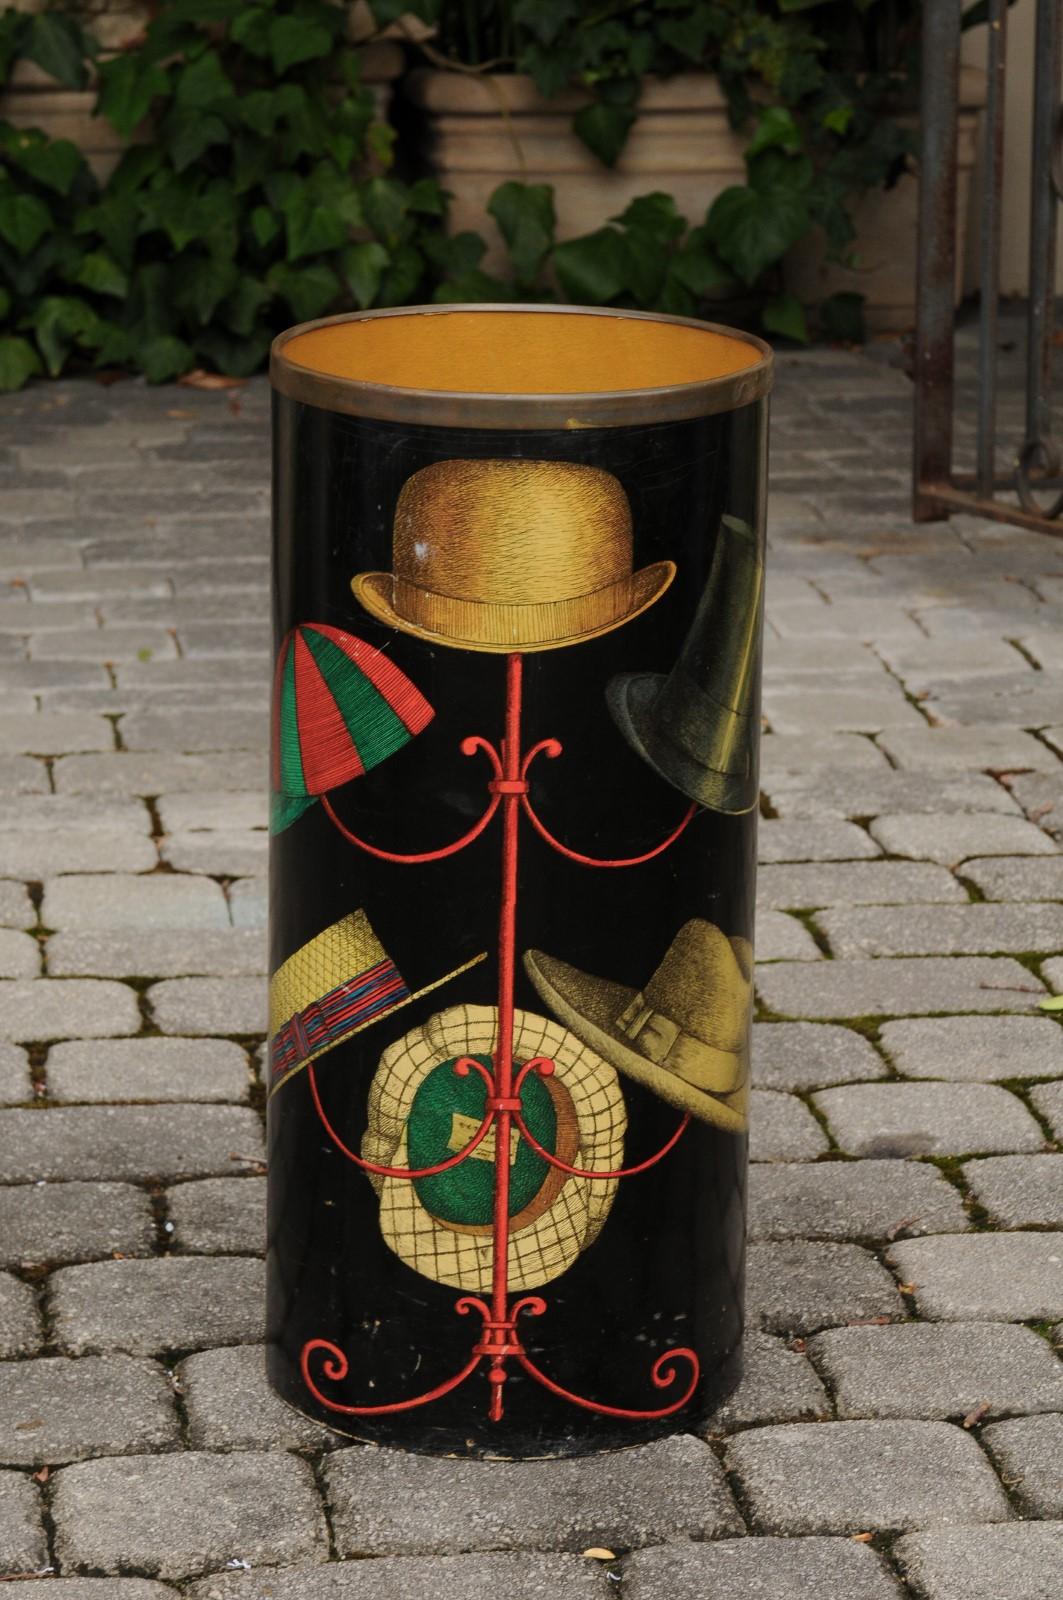 An Italian vintage lacquer umbrella stand with brass trim from the mid-20th century, signed Fornasetti. Born in Italy during the 1960s, this umbrella stand was created by Piero Fornasetti who founded in the Fifties the design and decorative arts